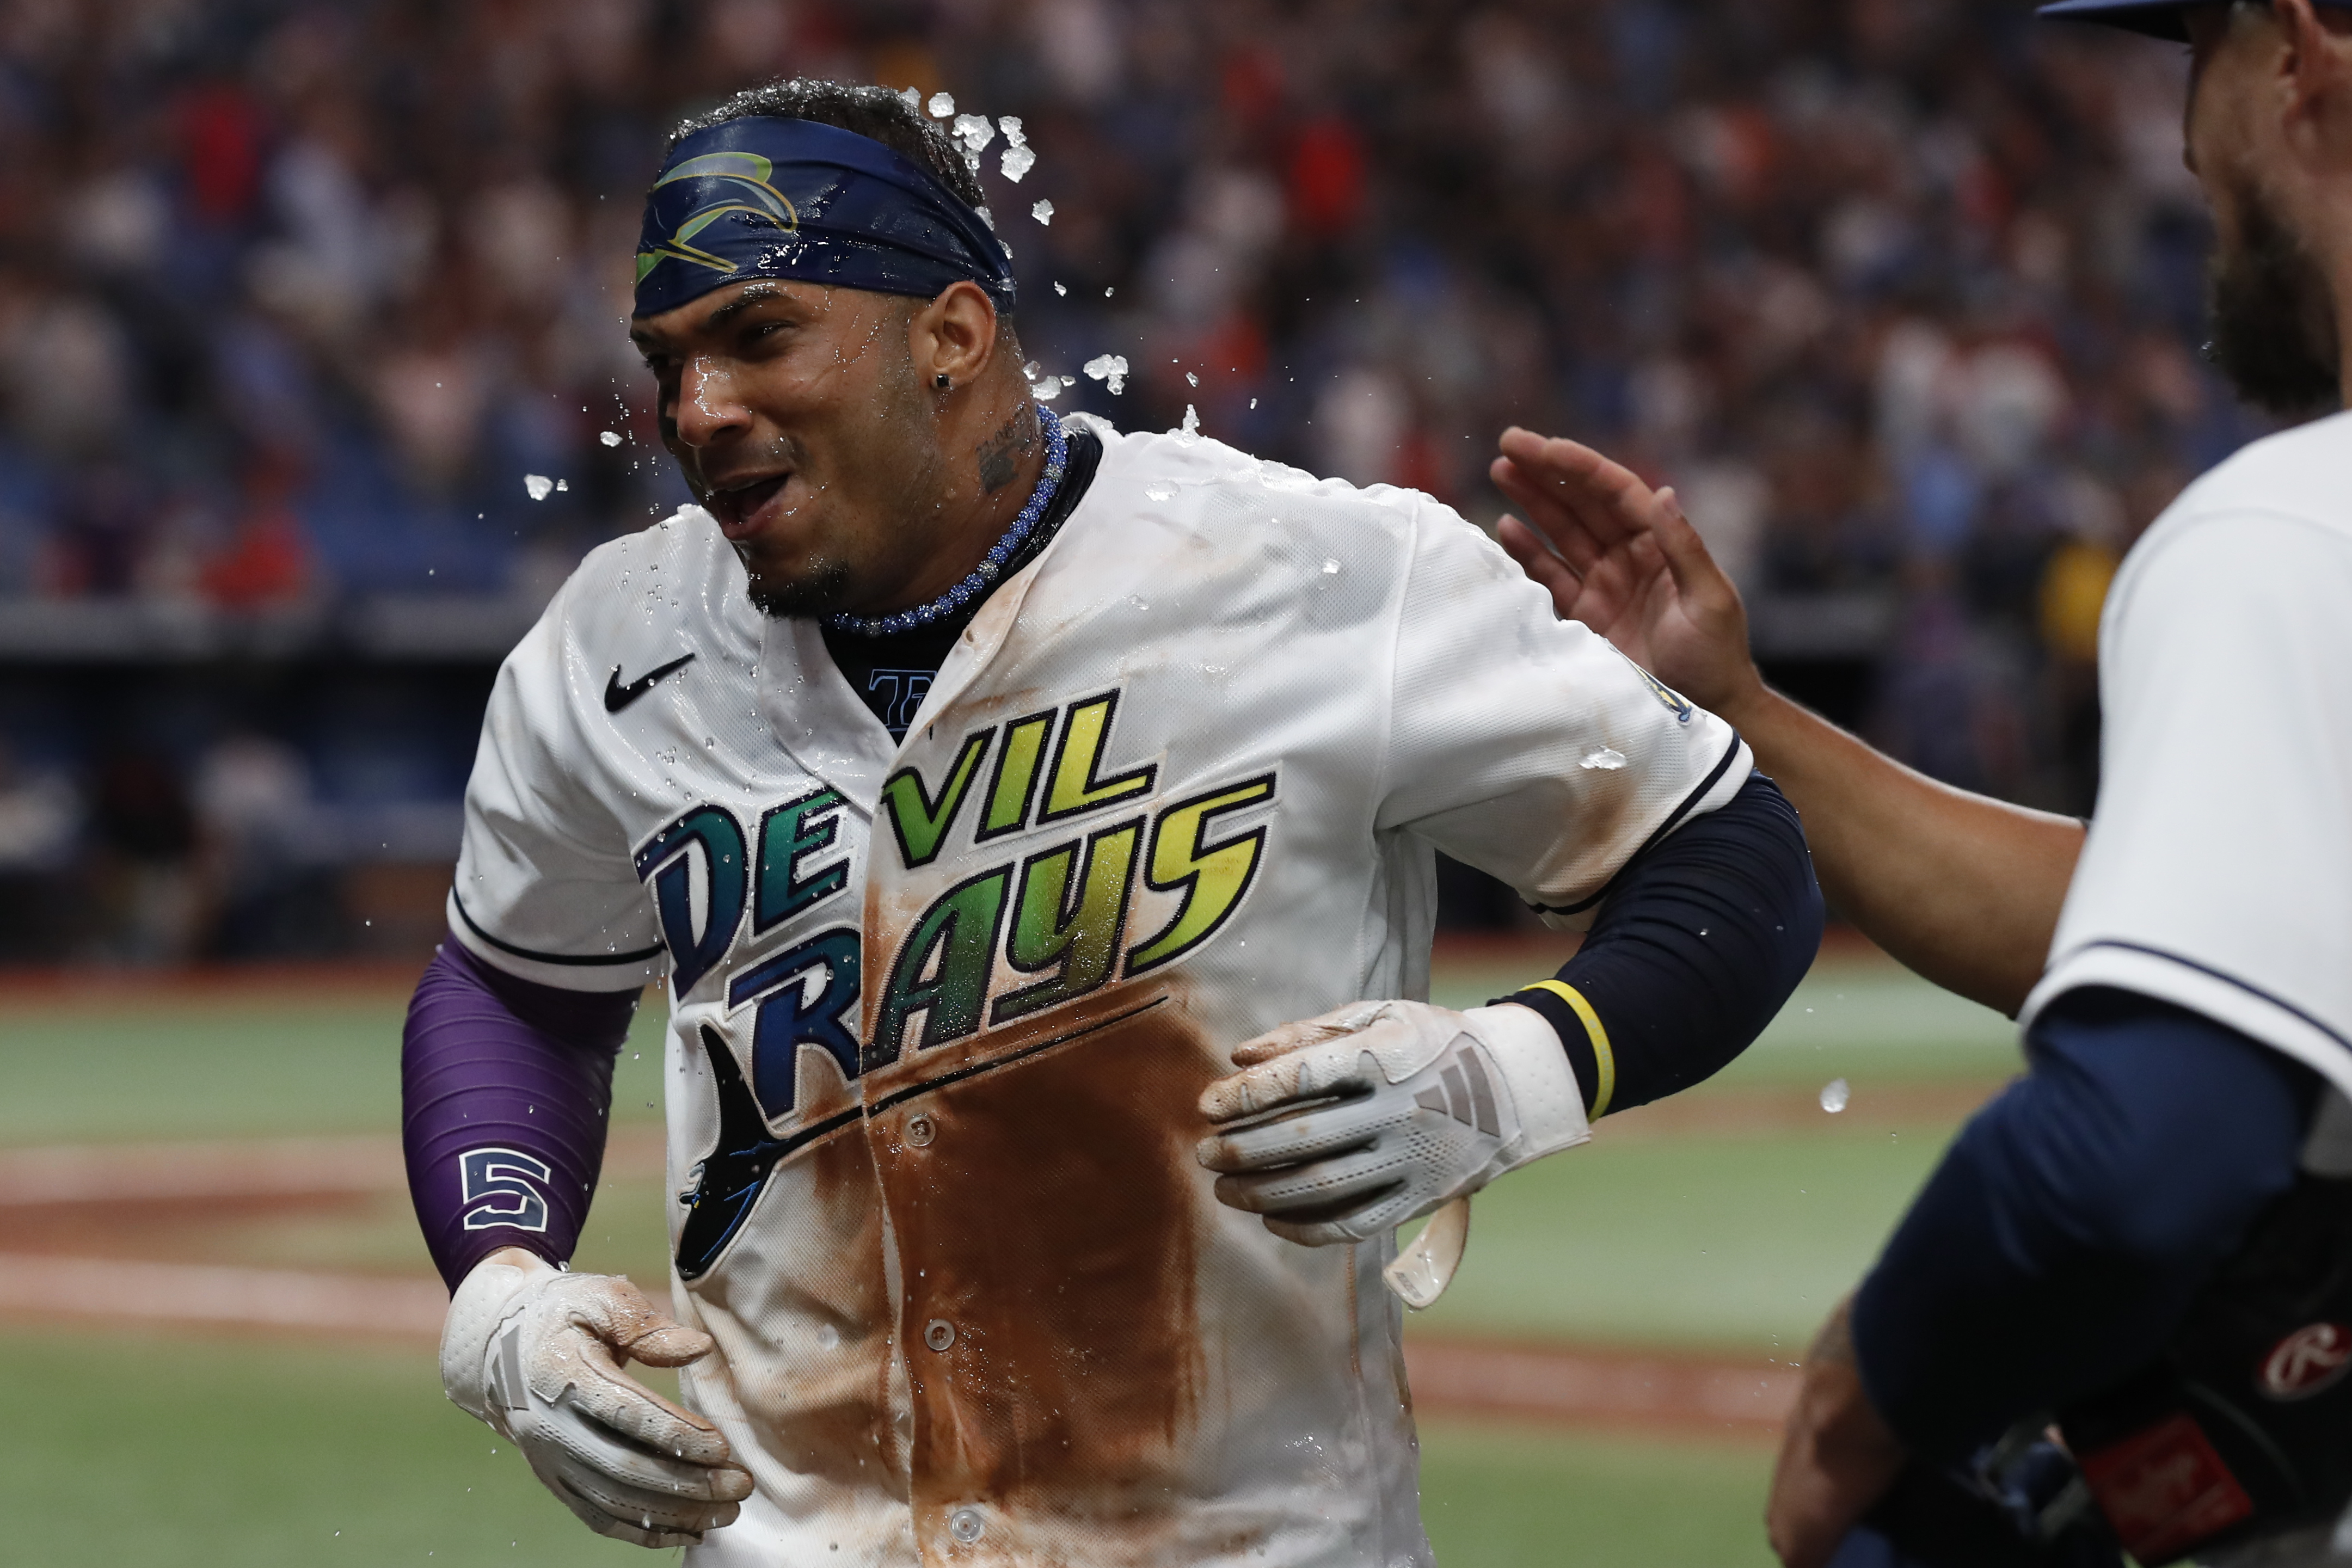 Dominican authorities investigate Rays' Wander Franco for an